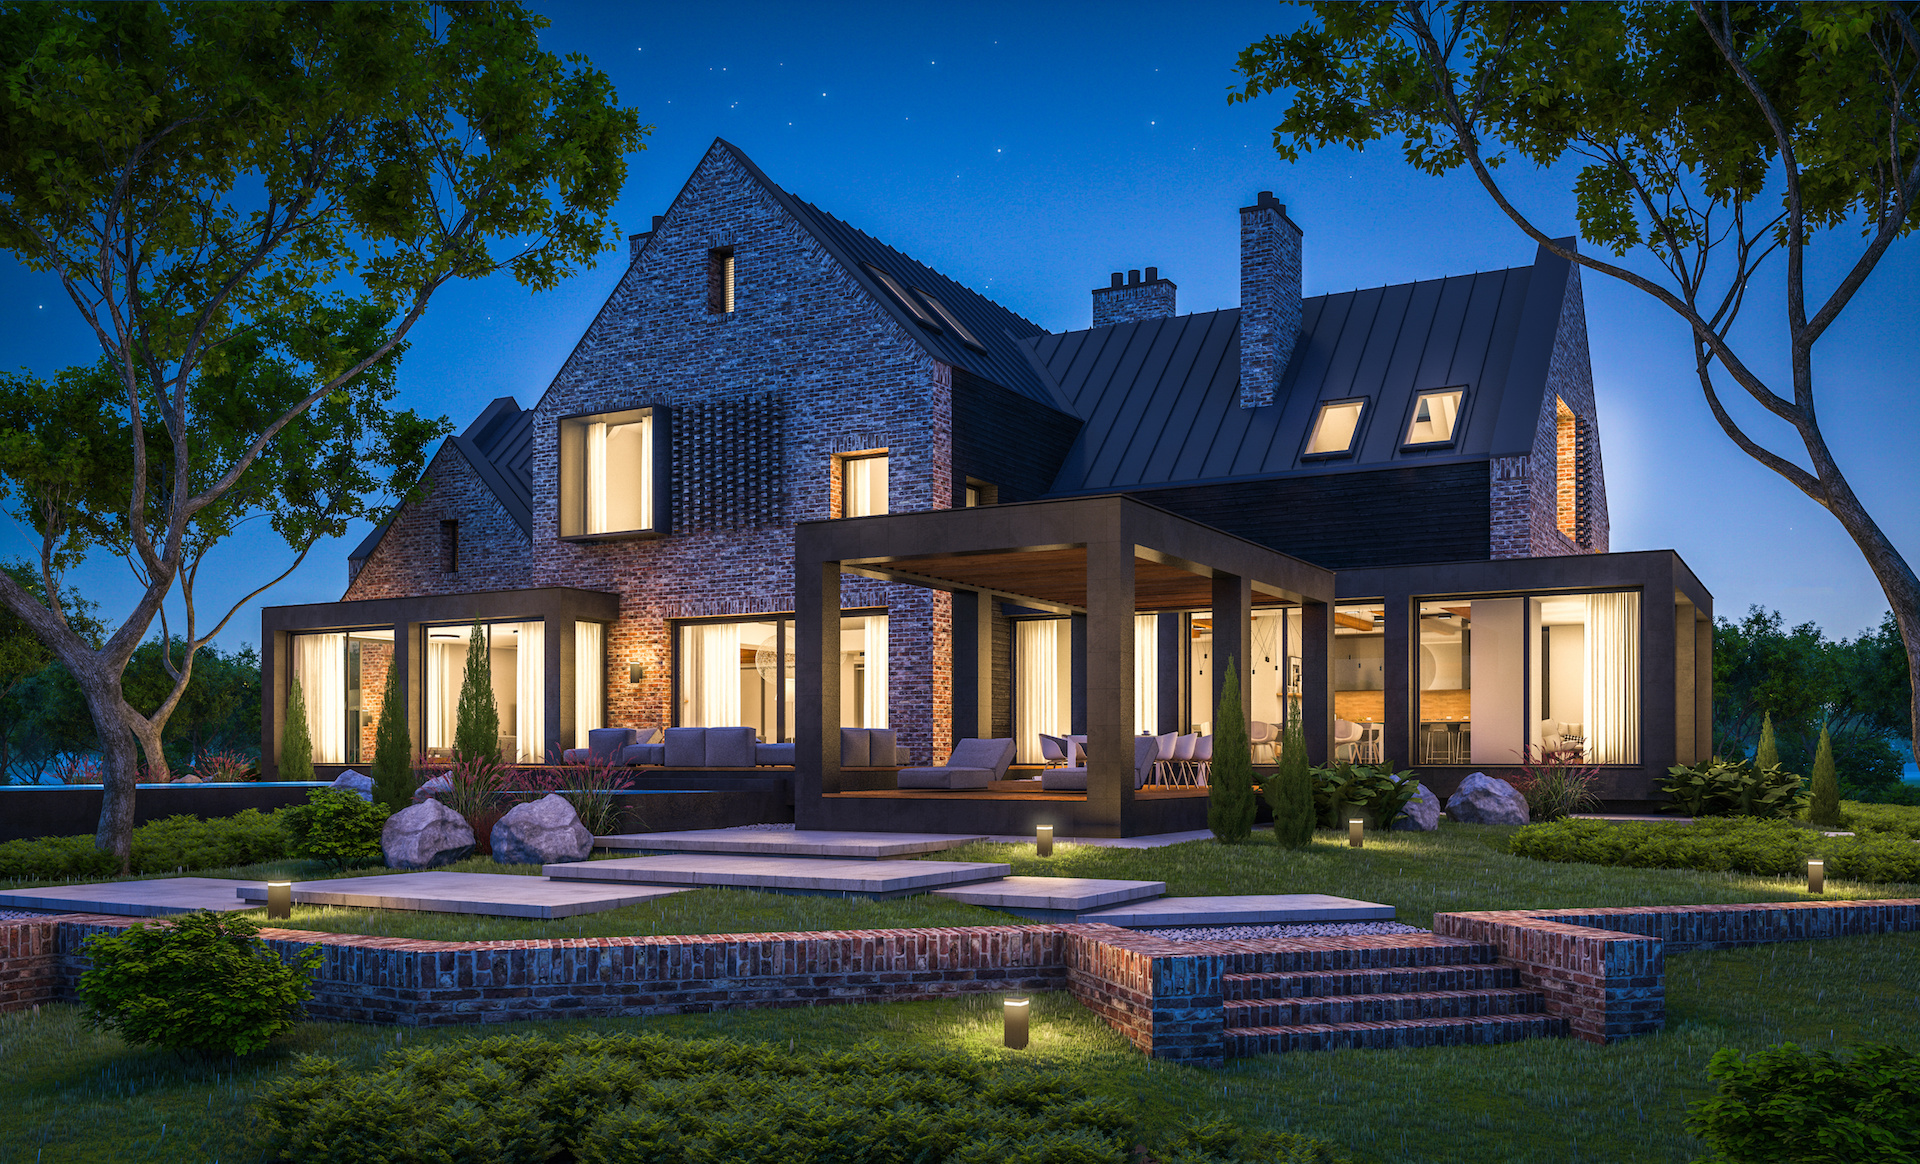 Luxury Real Estate Photography Strategies: Enhancing Your Marketing with High-Quality Visuals